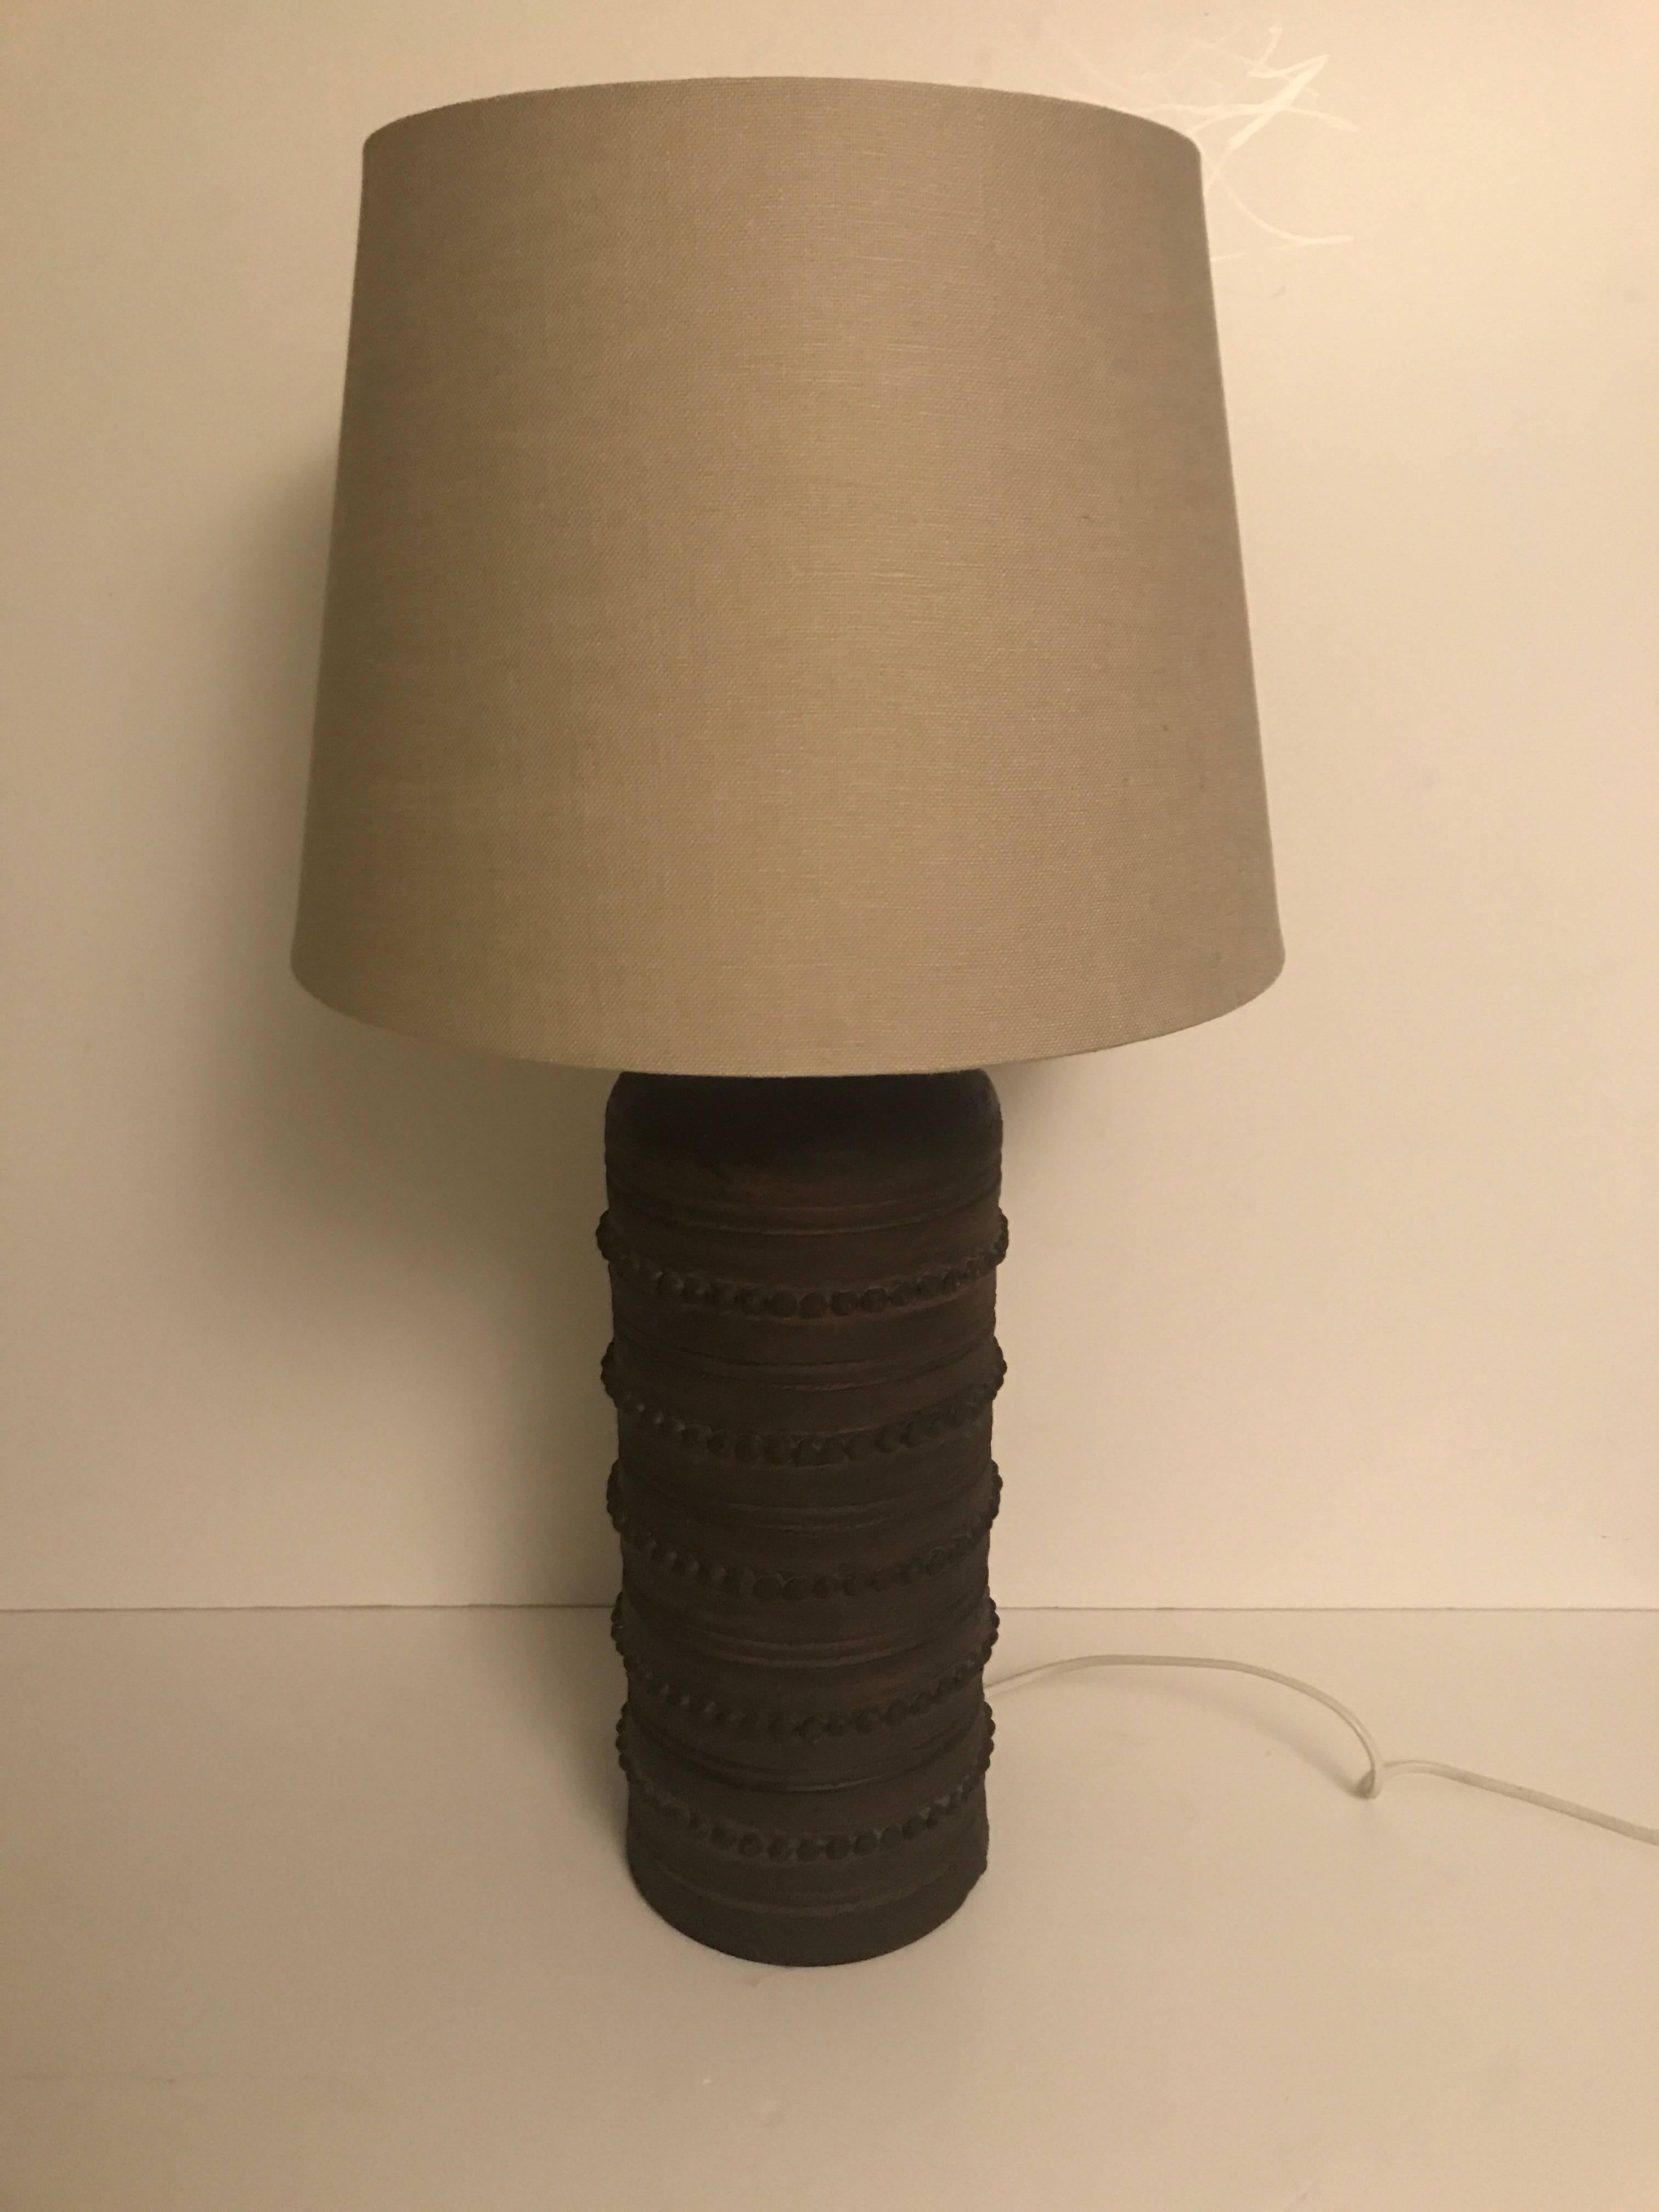 Hand-Crafted Large Swedish Ceramic Table Lamp by Italian Manufacturer Bitossi, 1960 For Sale